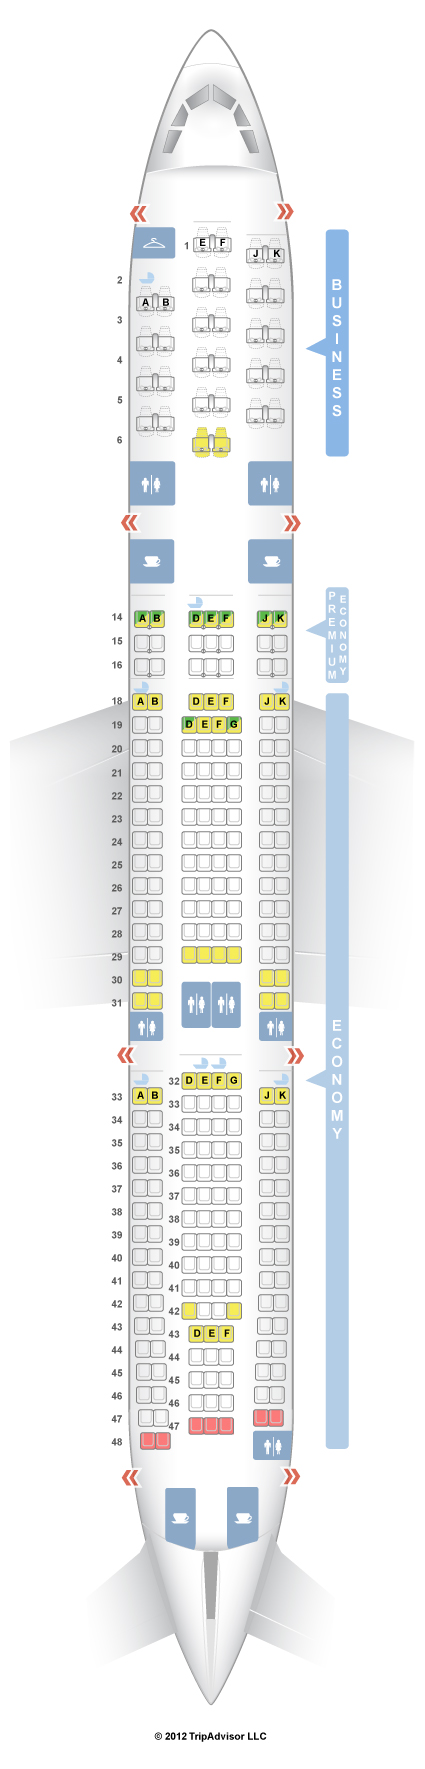 What is the seating configuration for the Iberia Airbus A340?